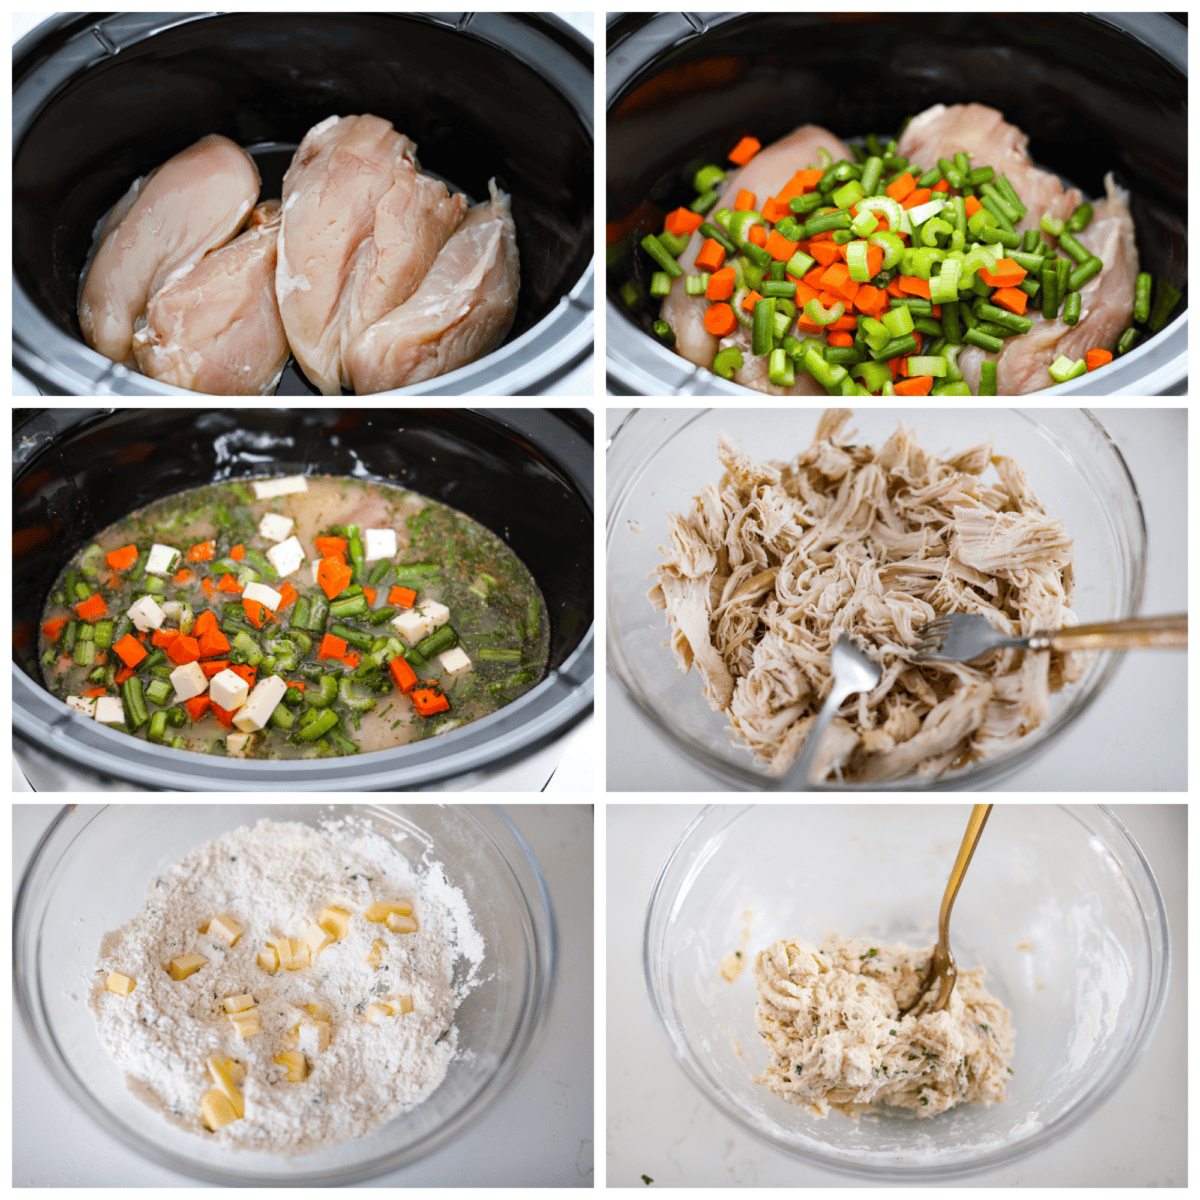 First photo of chicken in the crockpot. Second photo of vegetables added to the crockpot. Third photo of butter and broth mixture added to the crockpot. Fourth photo of shredded cooked chicken. Fifth photo of butter added to the dumpling ingredients. Sixth photo of dumpling mixture mixed in a bowl.